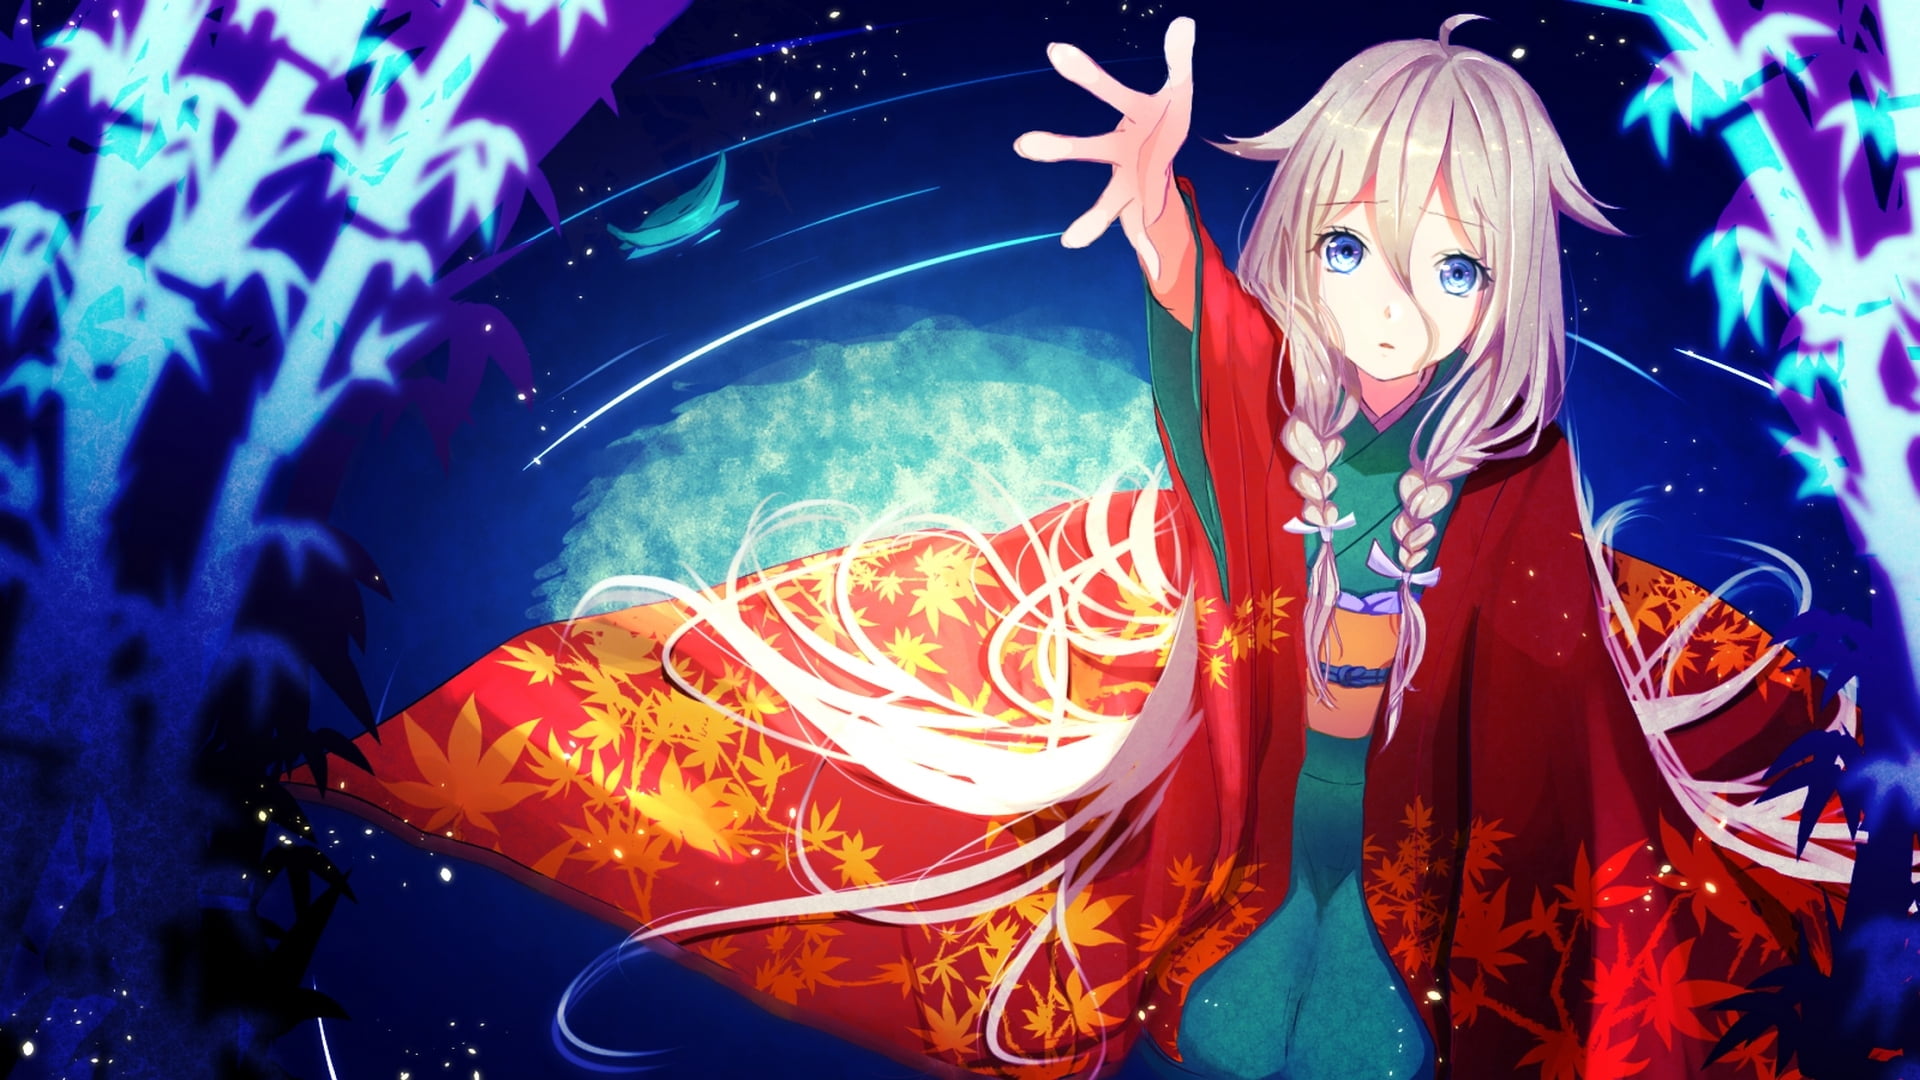 Female Anime Character Wearing Red Cape Hd Wallpaper Wallpaper Flare Want to discover art related to red_cape? female anime character wearing red cape